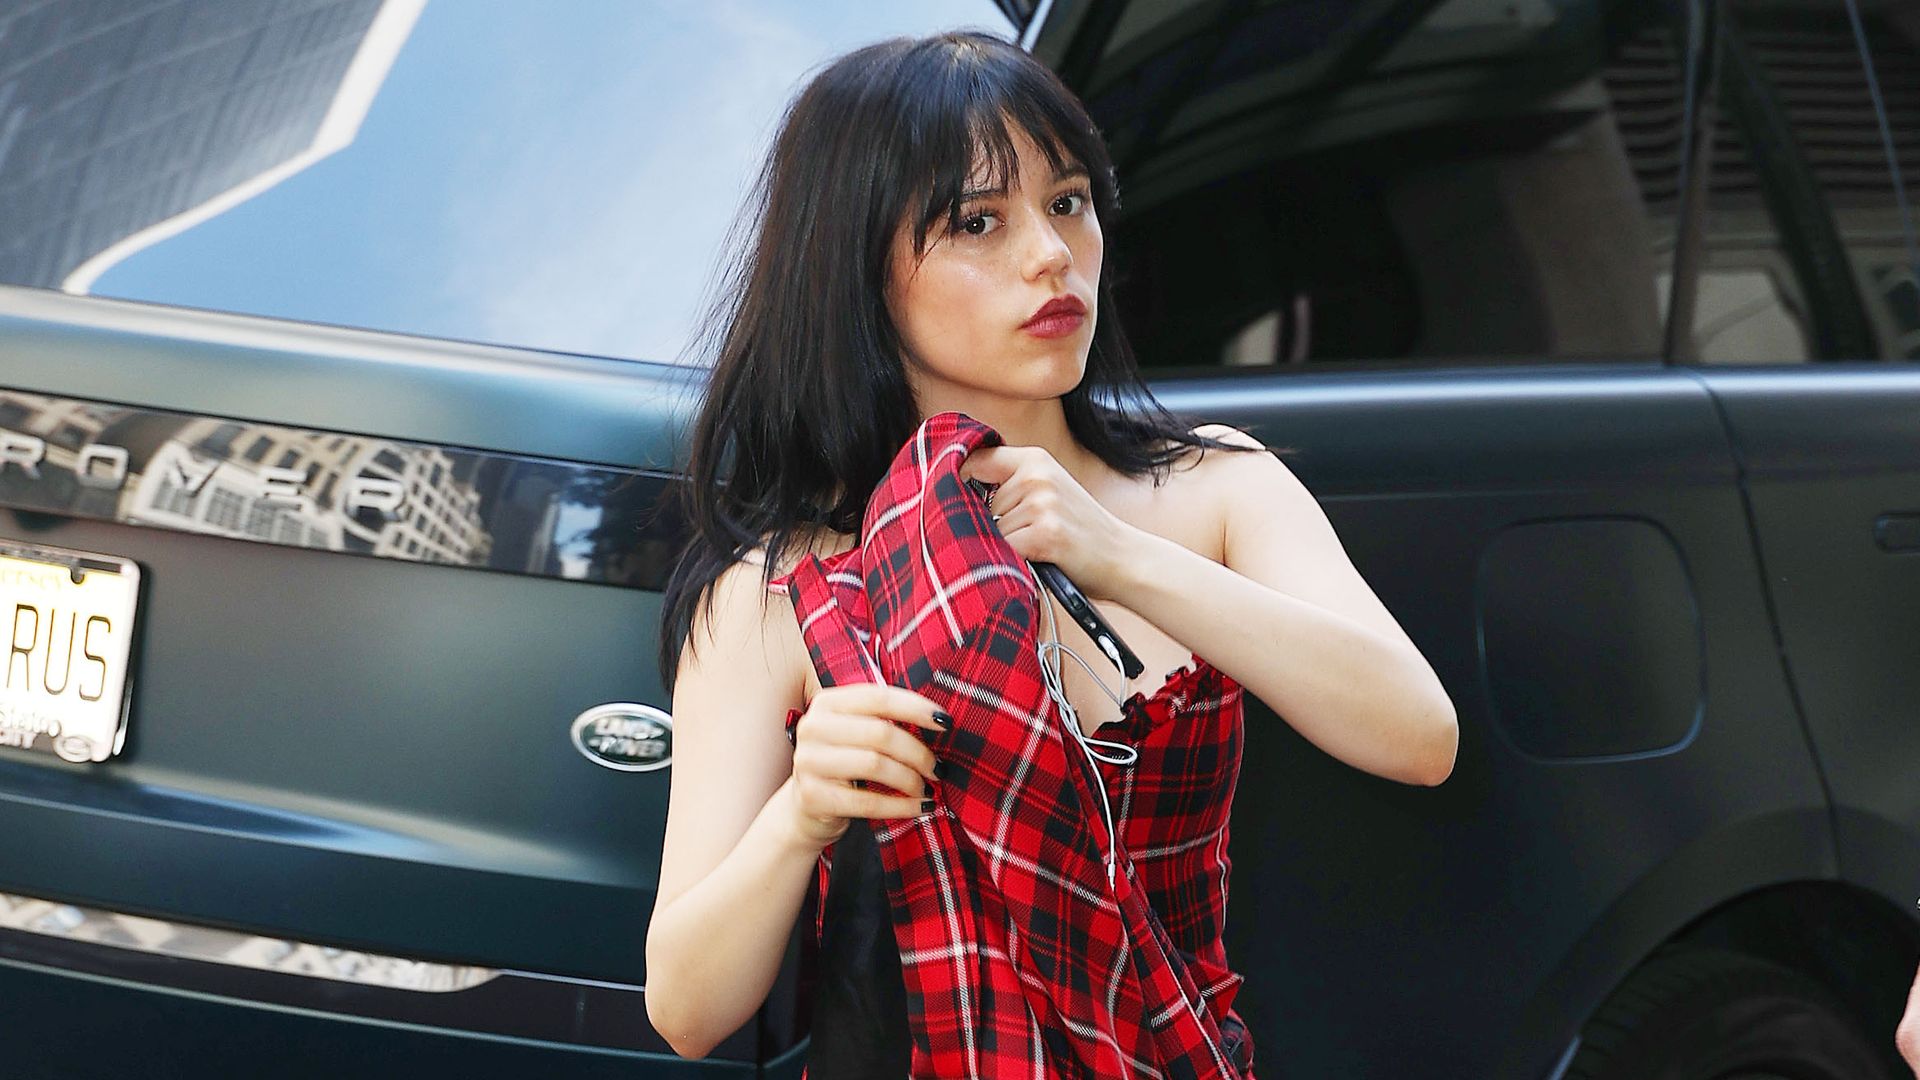 Jenna Ortega steps out in edgy red dress in latest New York City outing